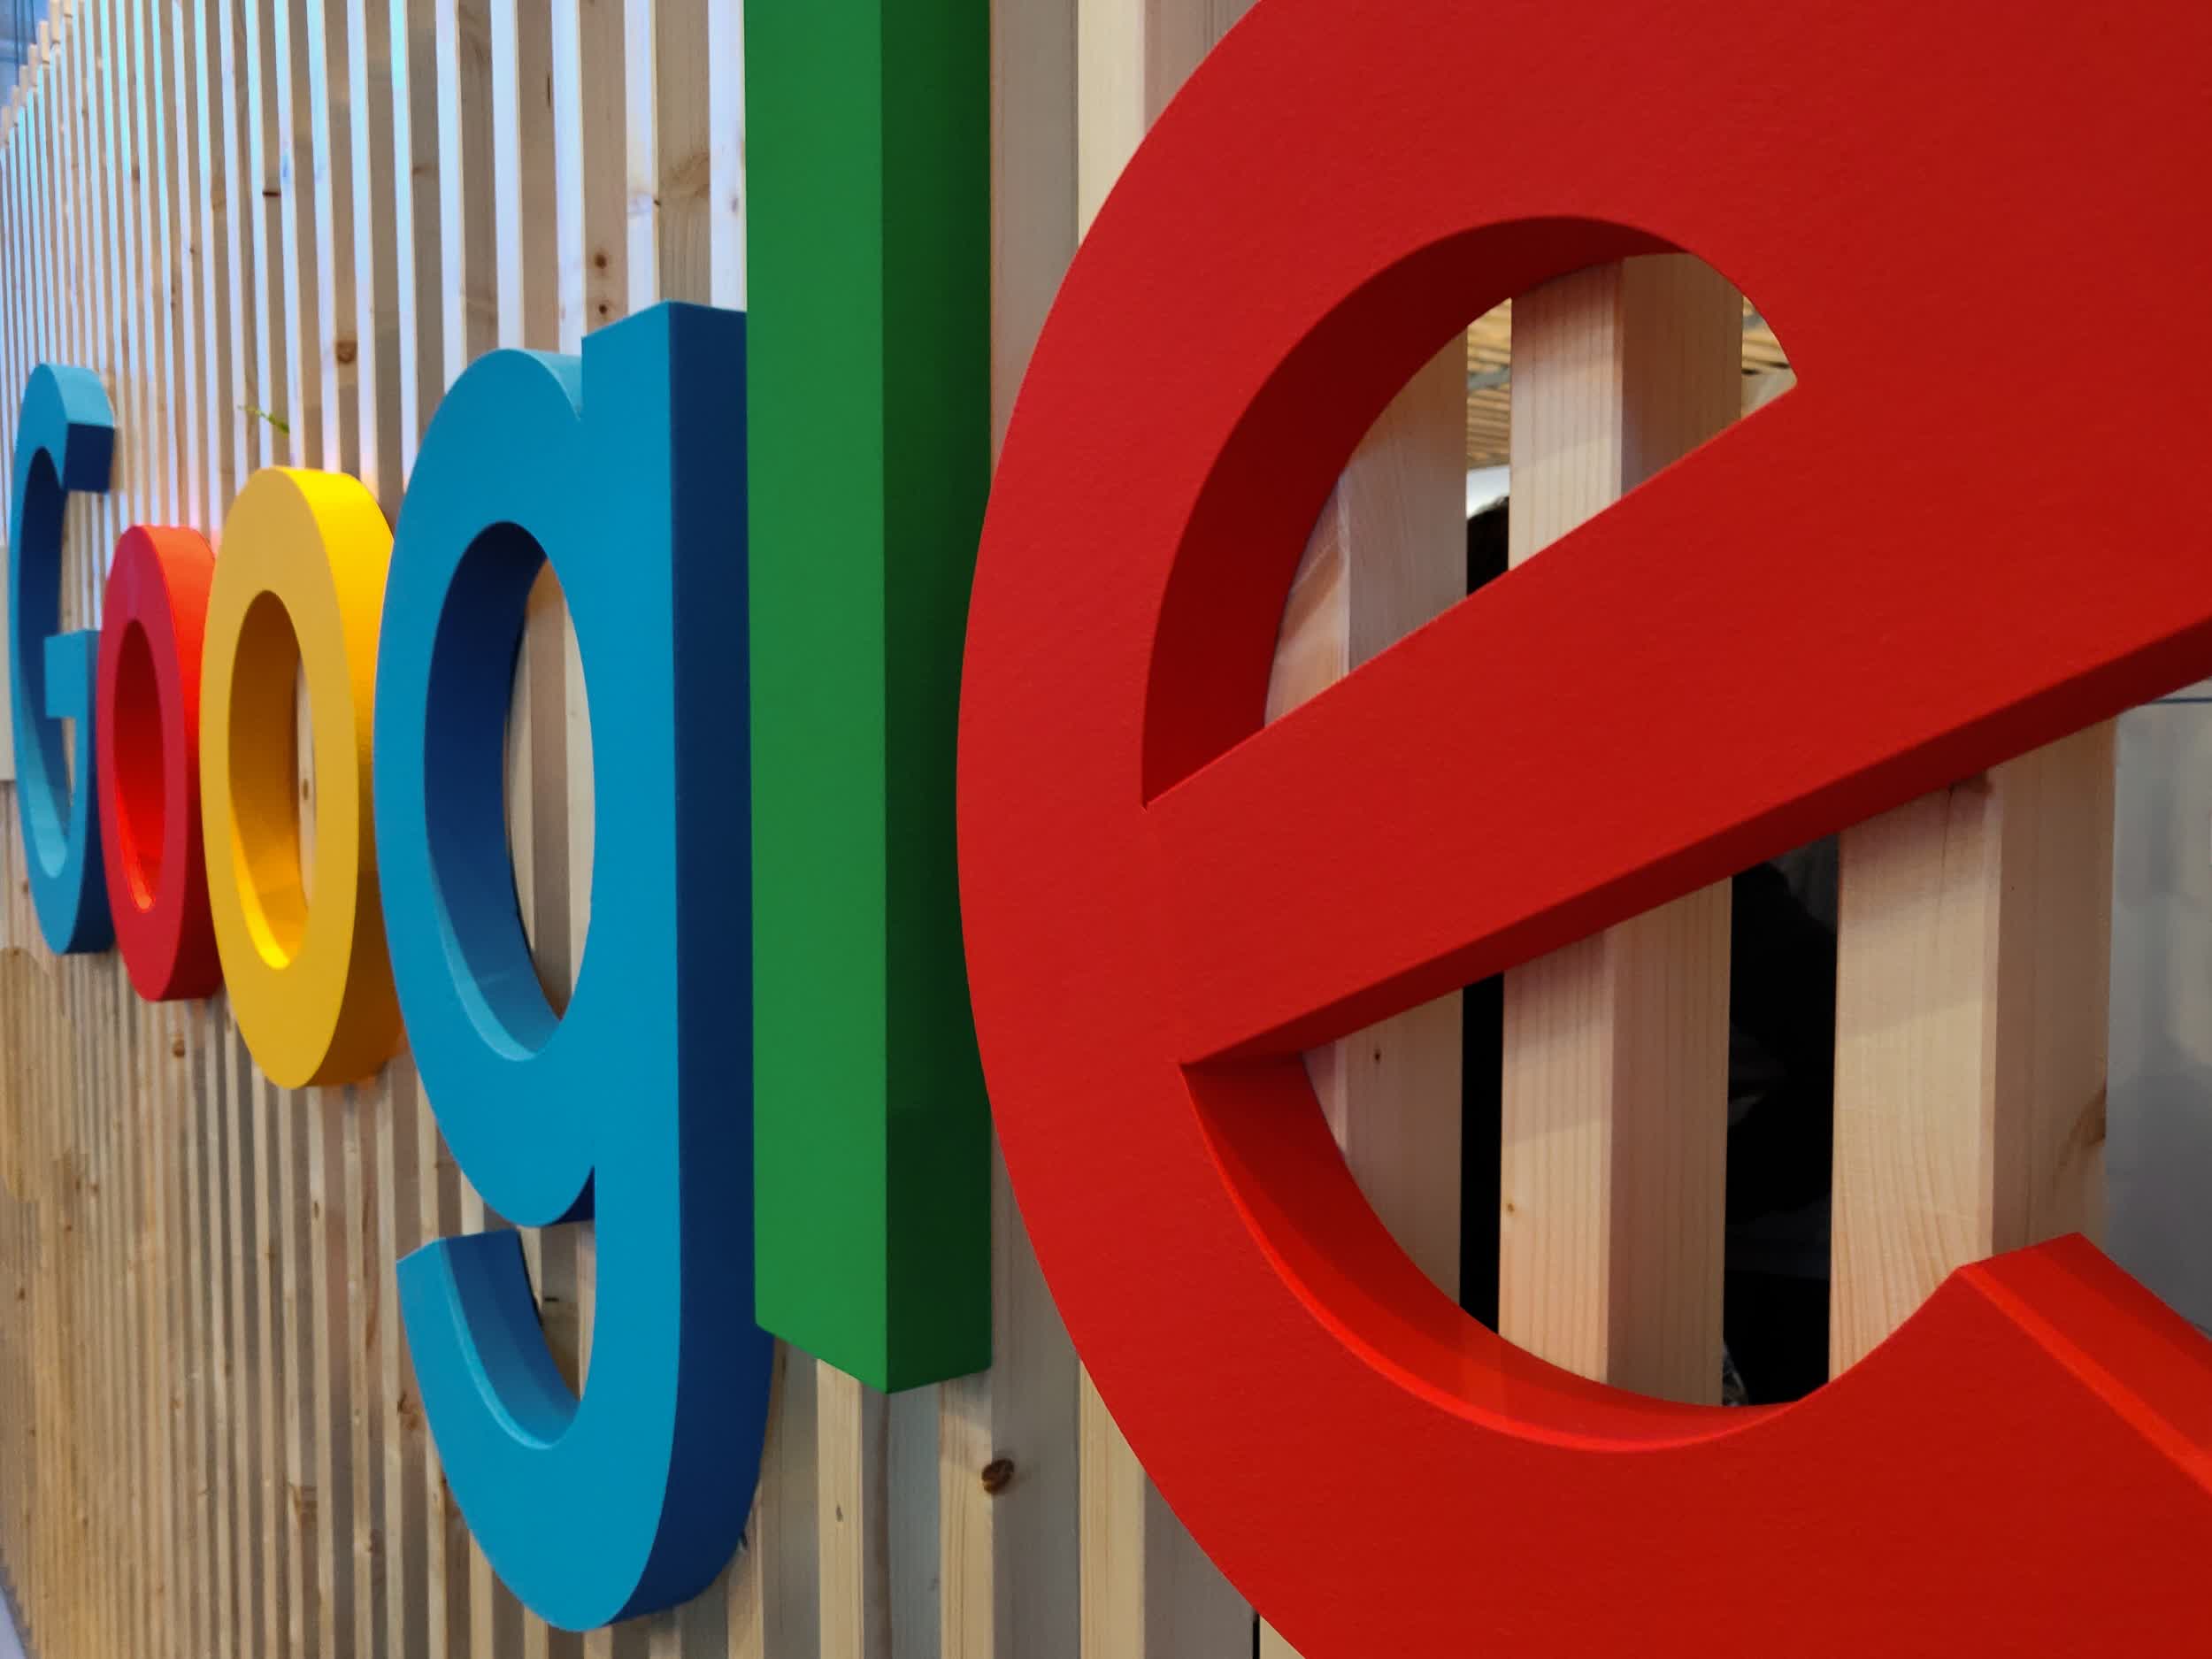 South Korean competition watchdog fines Google $177 million for blocking Android forks